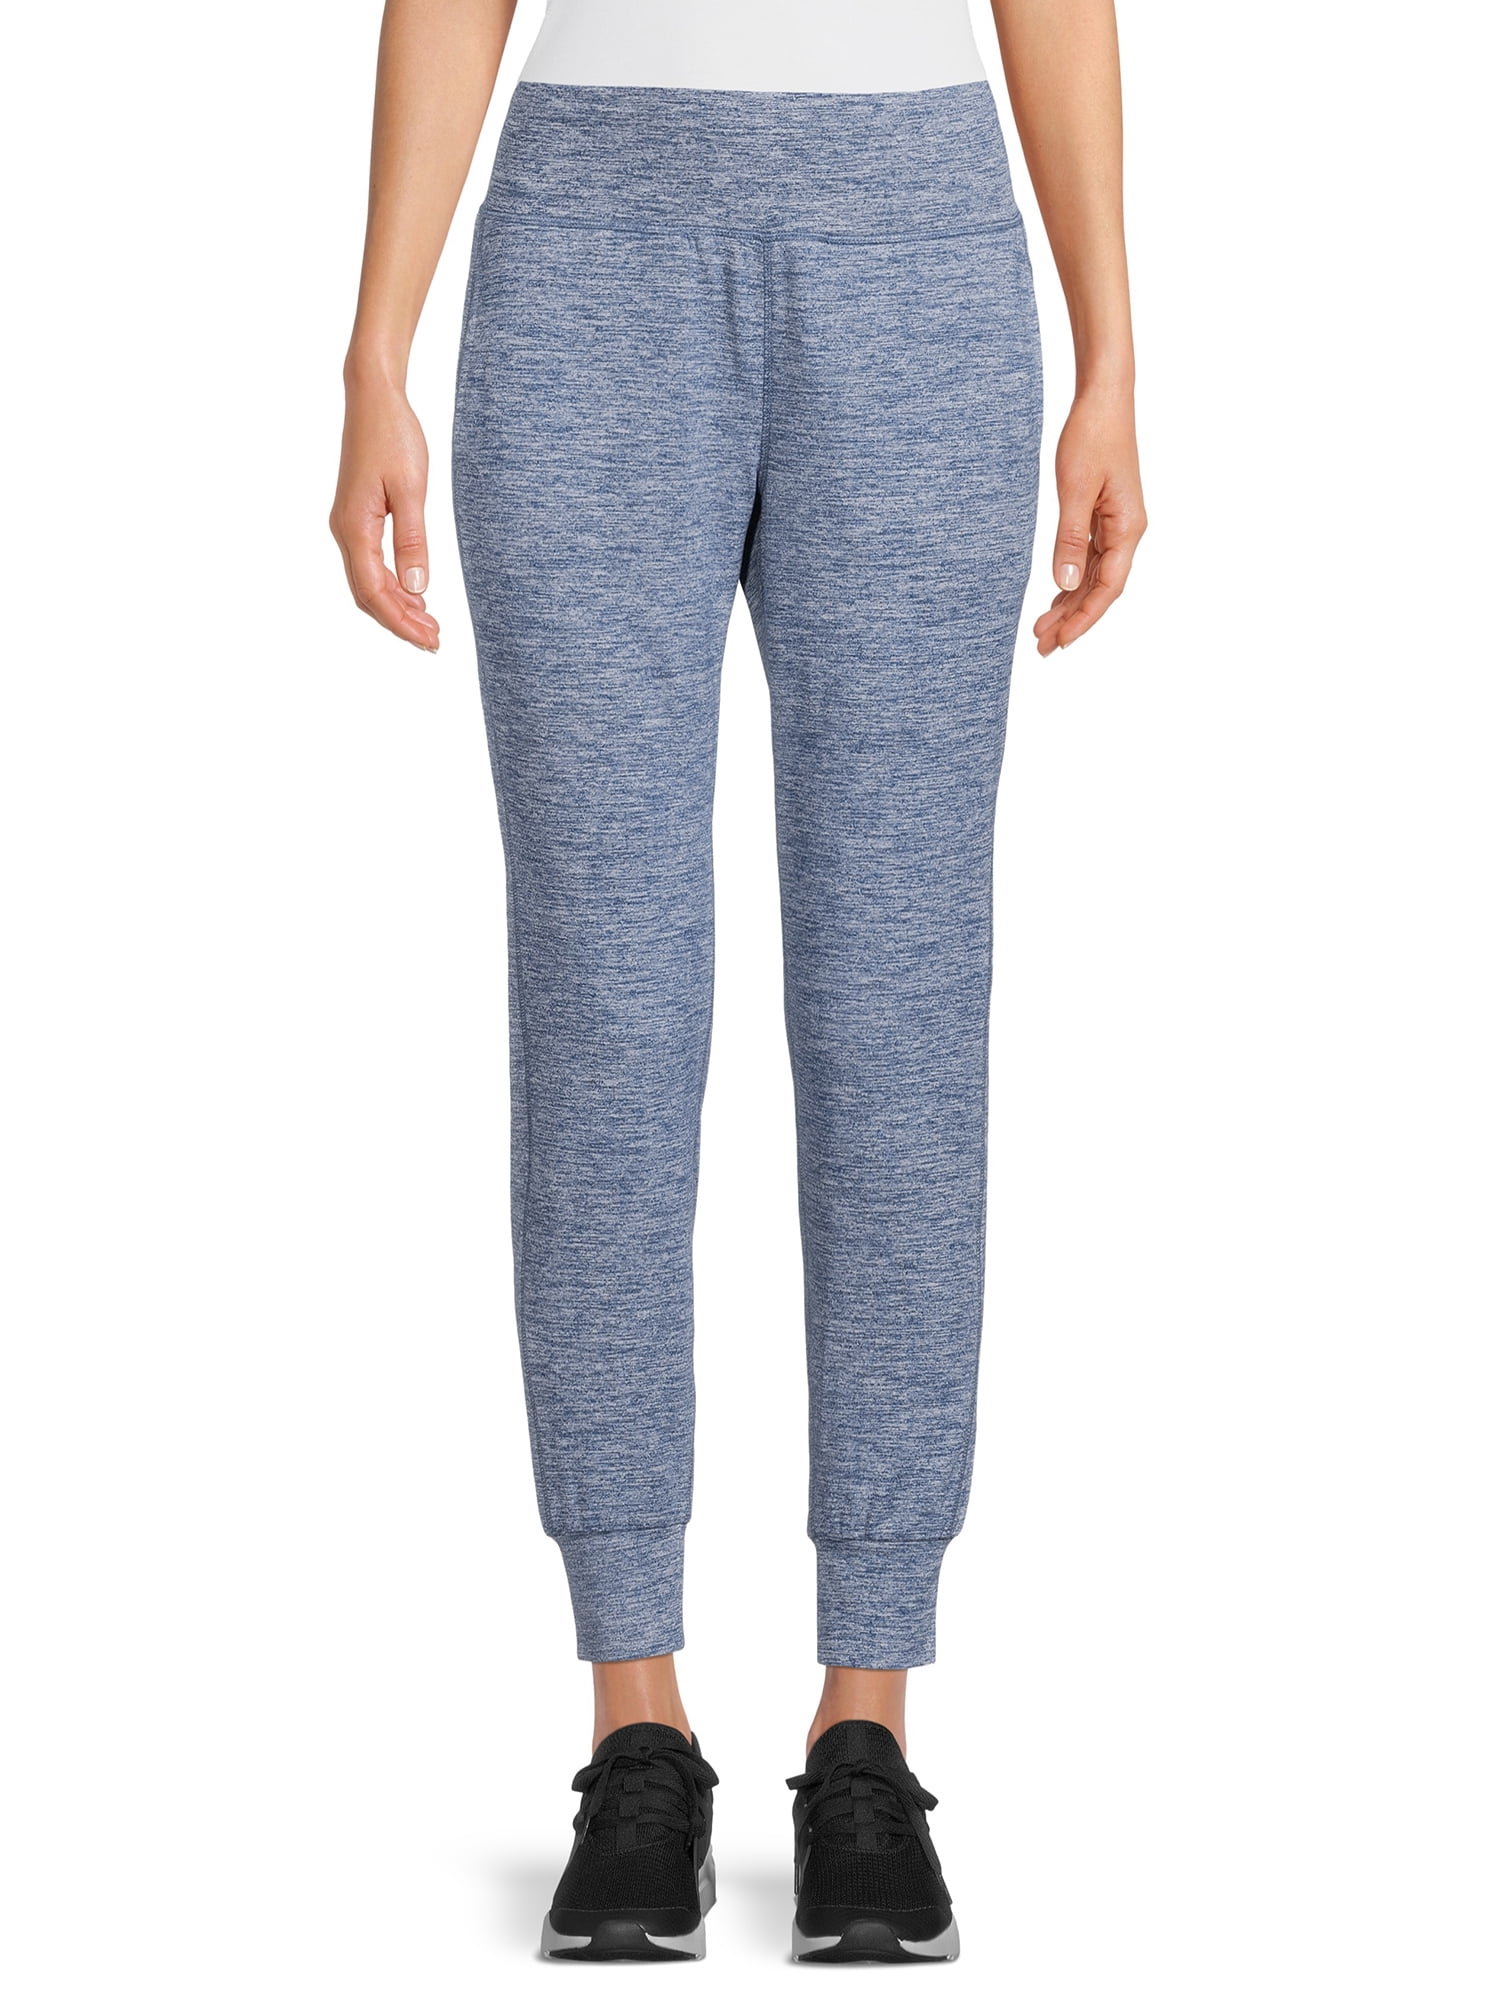 Athletic Works Women's Super Soft Lightweight Joggers with Pockets